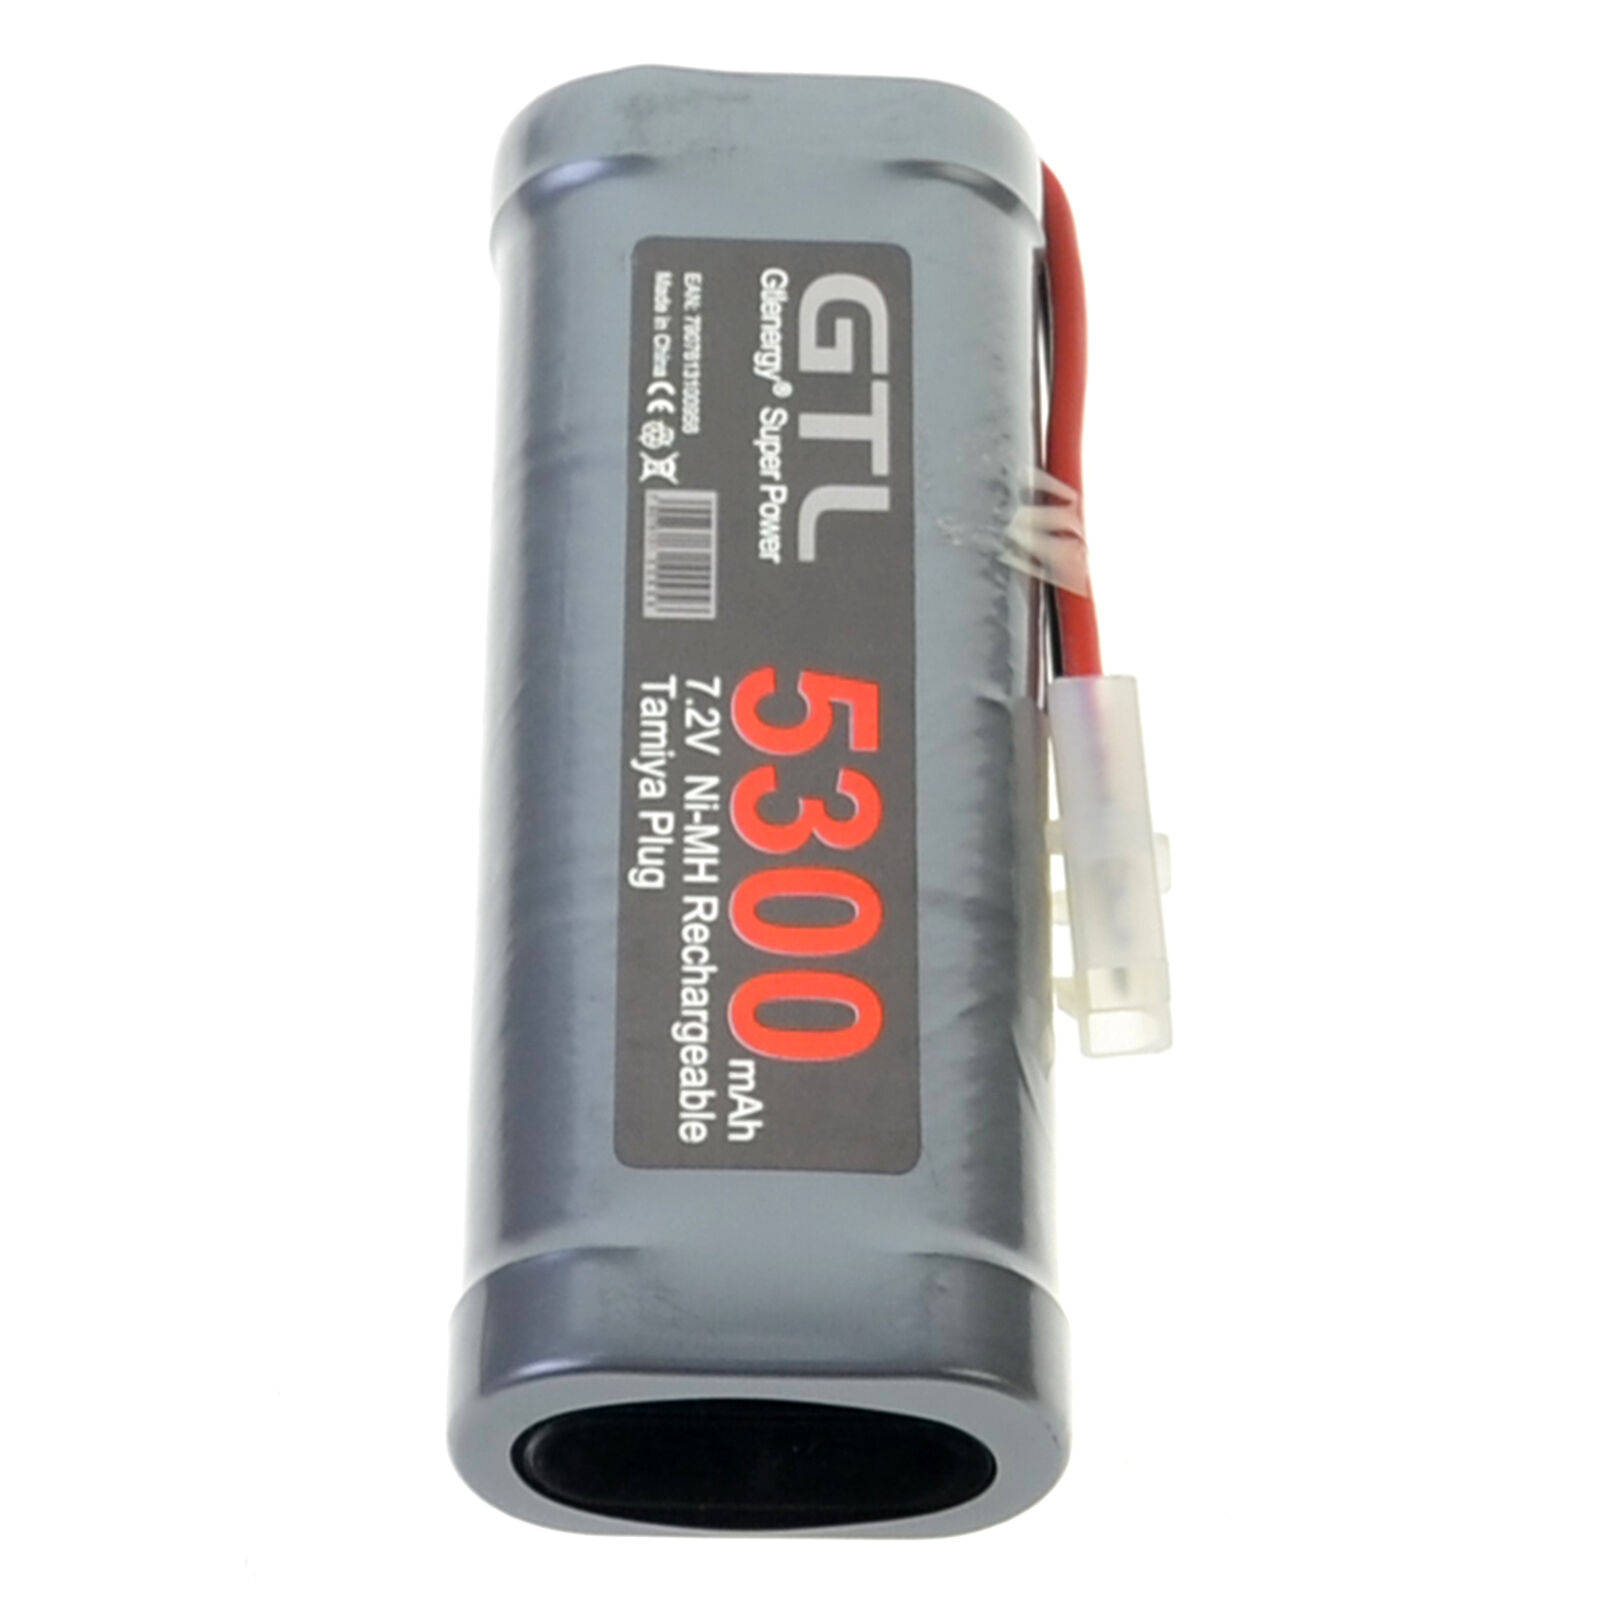 1X 7.2V 5300mAh Ni-Mh Rechargeable Battery Pack For RC Car With Tamiya Plug US